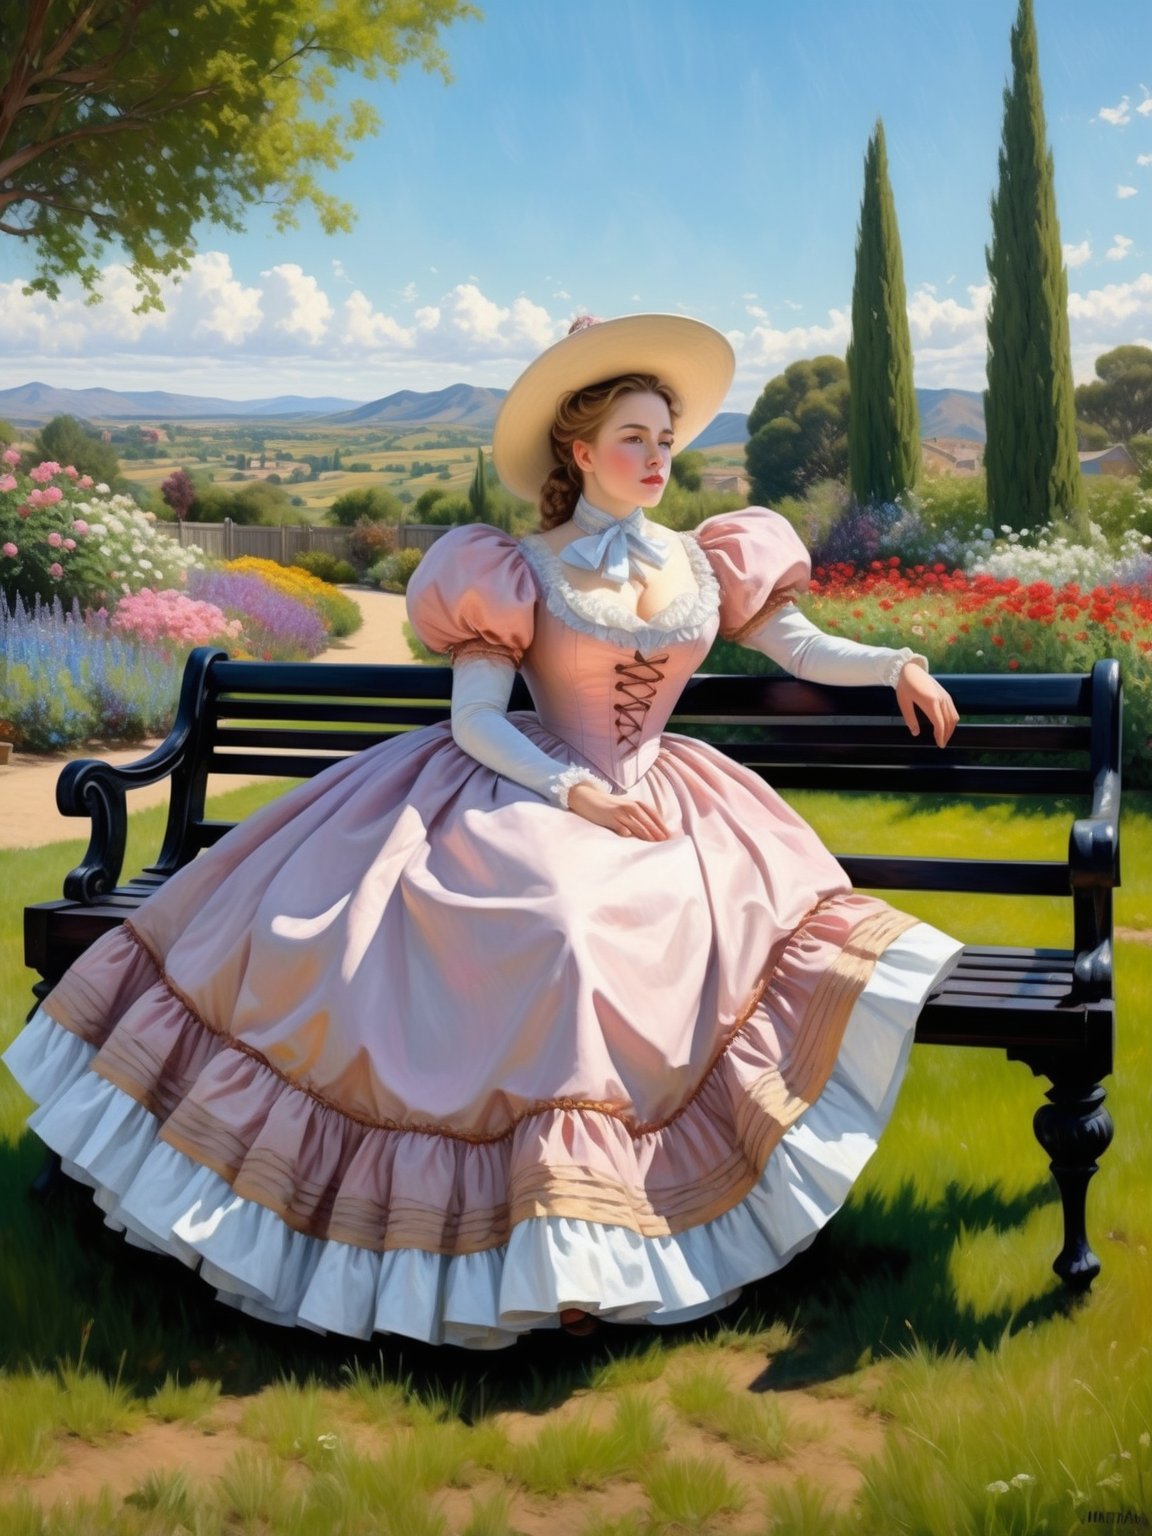 Painting of a noblewoman in an 1880 crinoline dress sits on a bench in the garden. 18" waist. Sense of awe-inspiring grandeur, compositional tension and instability, highly florid style, and intellectual sophistication. A high-concept design with striking visual contrasts. Wide angle. Cluttered maximalism. Extremely high-resolution details. beautiful landscapes, hyperrealistic precision, and digital art techniques. Split complementary color harmony. Close-up. Cowboy shot.